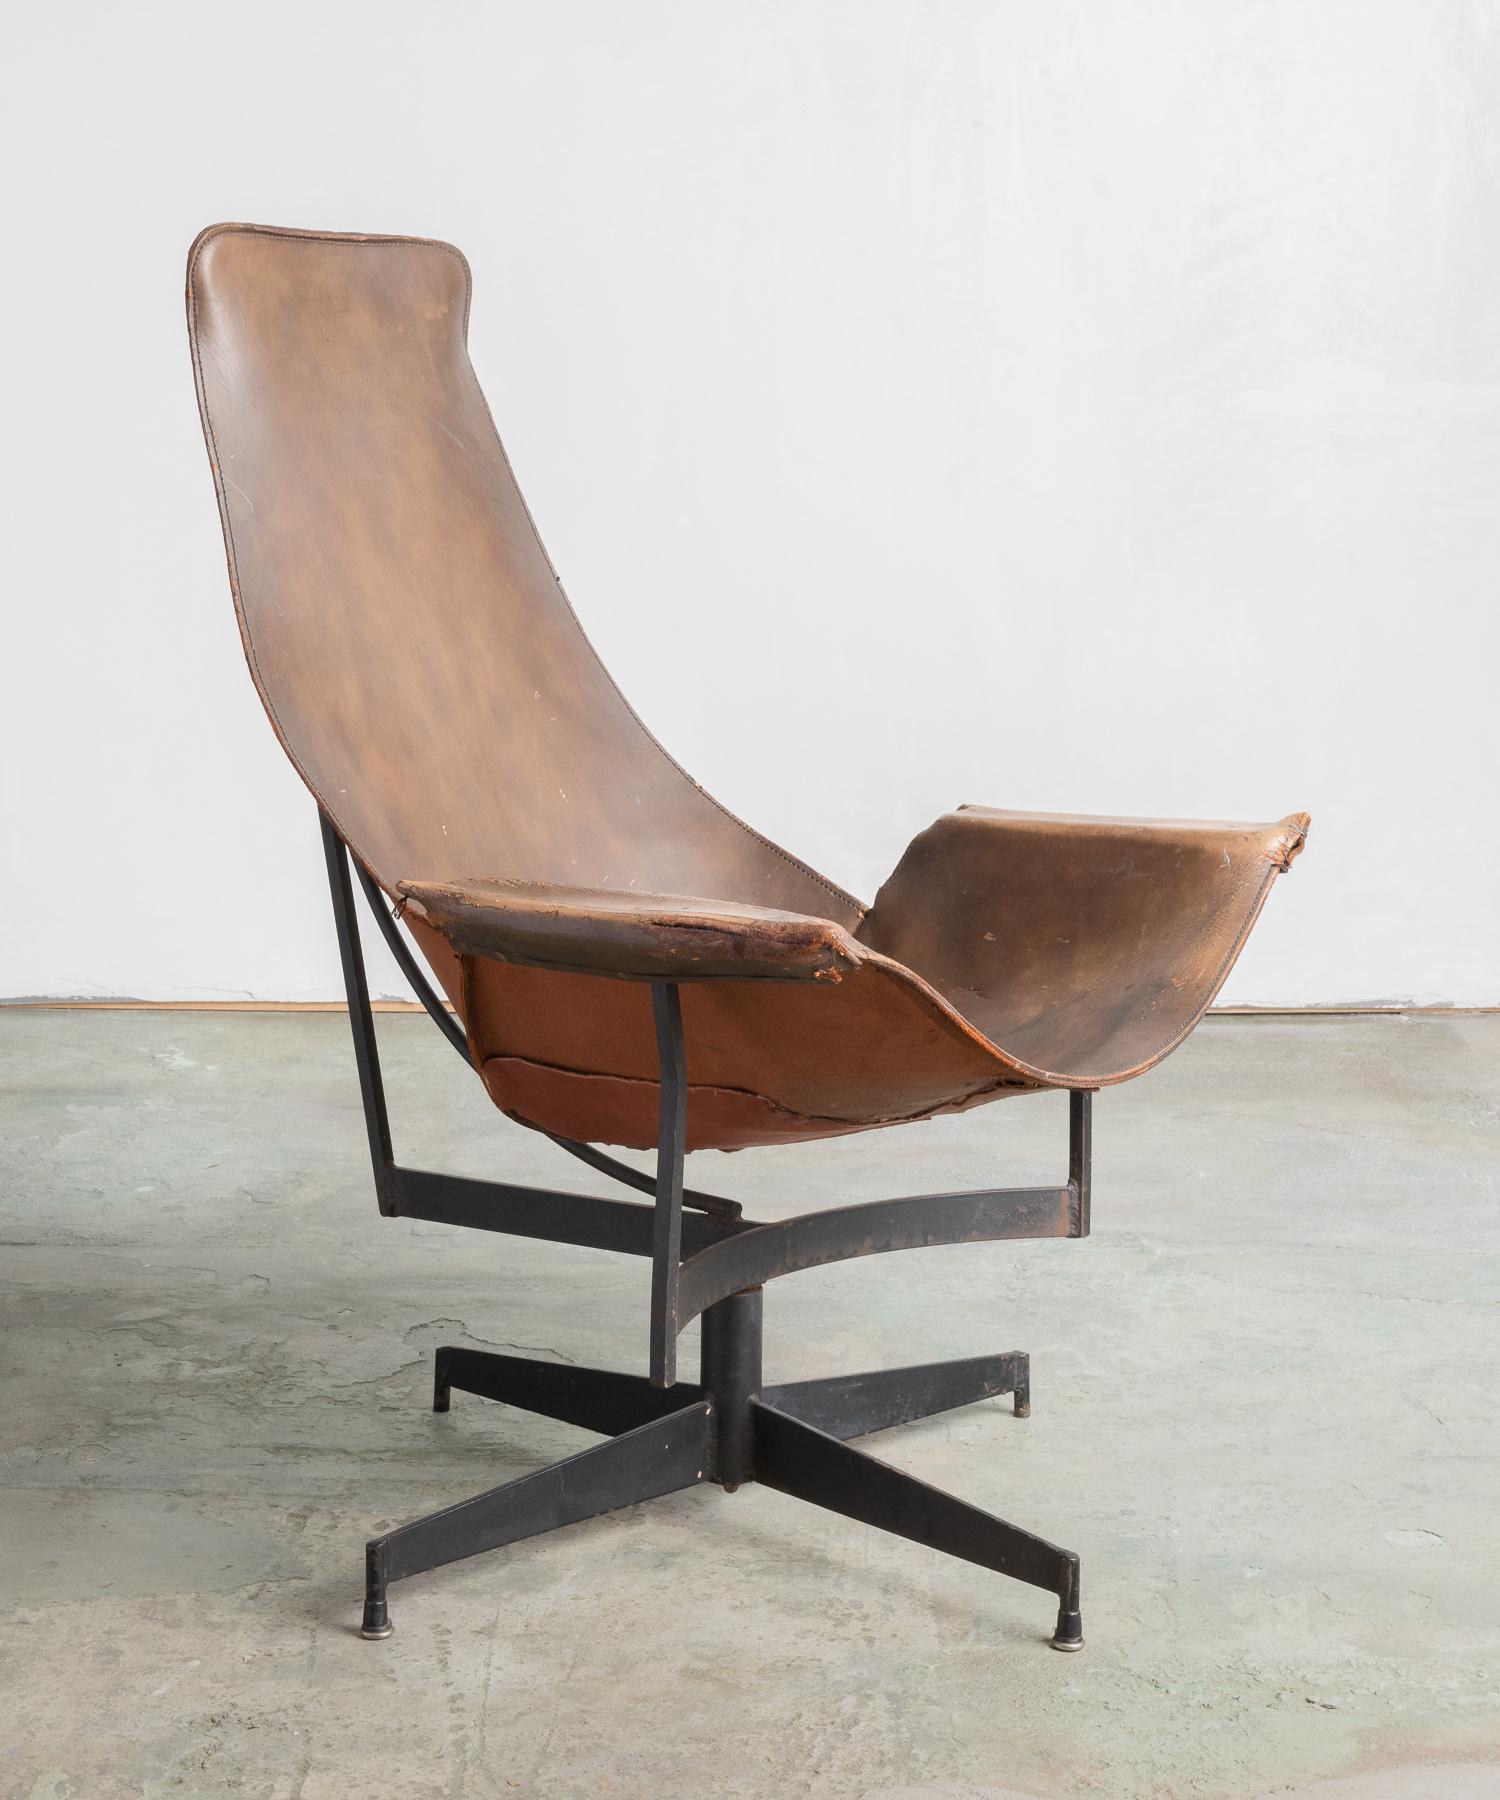 Leather Sling chair by William Katavolos, circa 1950.

A well-patinated leather form rests atop a metal structure. Designed for Leathercraft.

This item ships from Providence, Rhode Island.